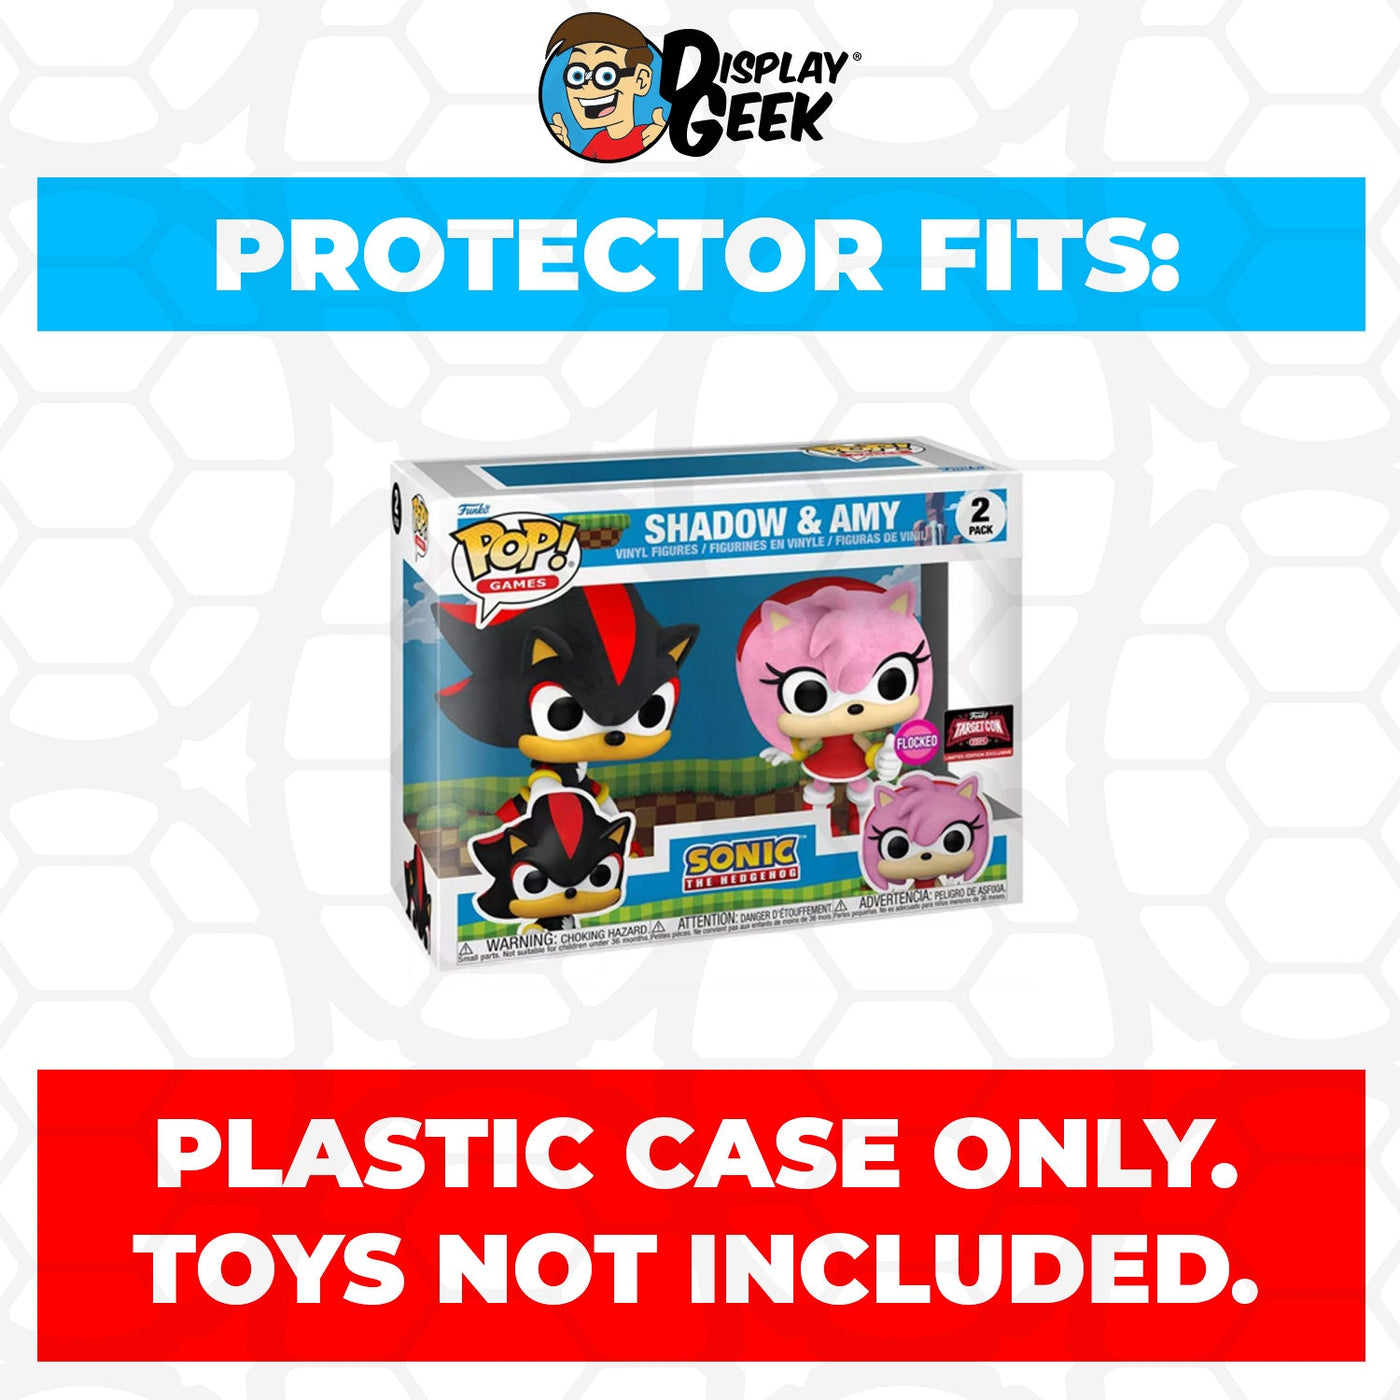 Pop Protector for 2 Pack Sonic the Hedgehog Shadow & Amy TargetCon Funko Pop on The Protector Guide App by Display Geek